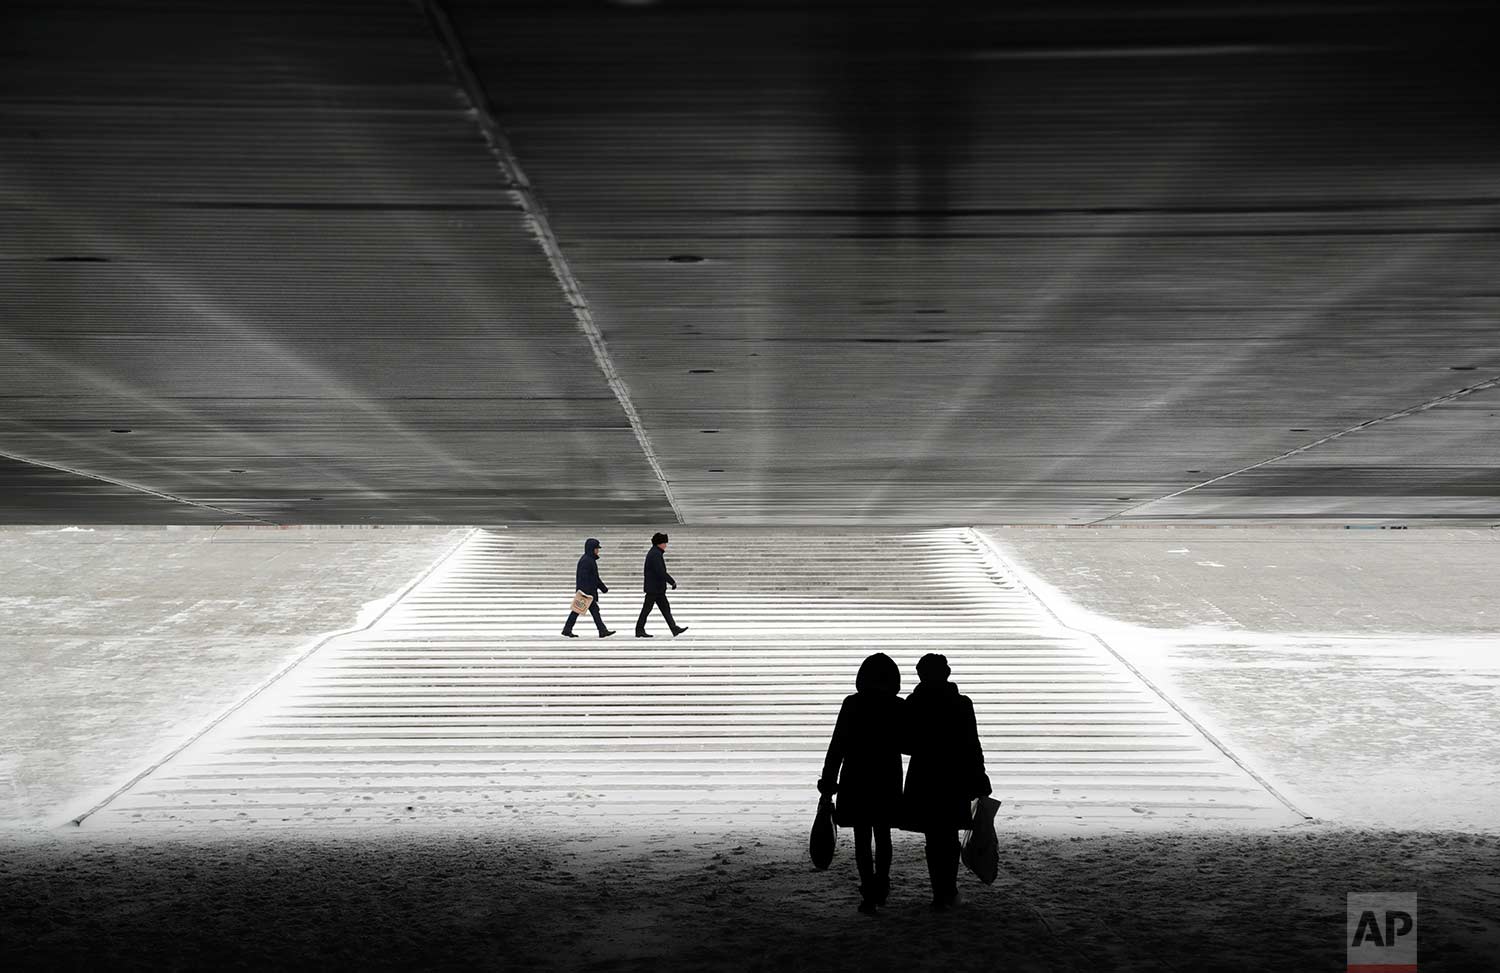  In this Wednesday, Jan. 25, 2017 photo, people walk through an underpass in Astana, Kazakhstan. The Kazakh capital was hit by a heavy gale and a snowfall with a temperature of - 6 C (F 21). (AP Photo/Sergei Grits) 